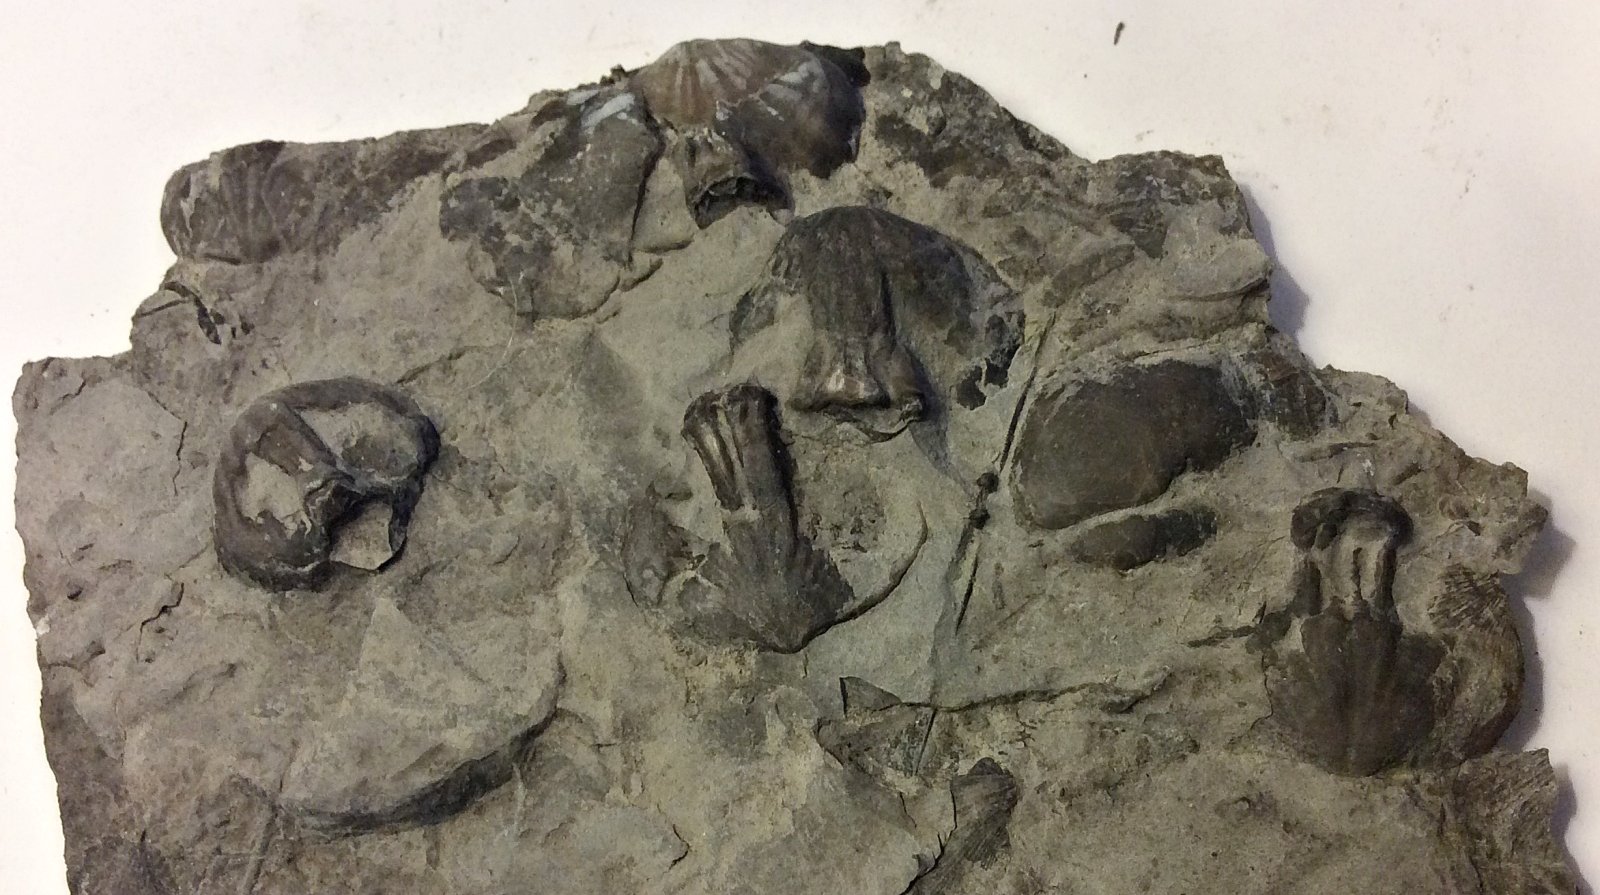 Cluster of Eatonia (Rhynchonellid) Brachiopods